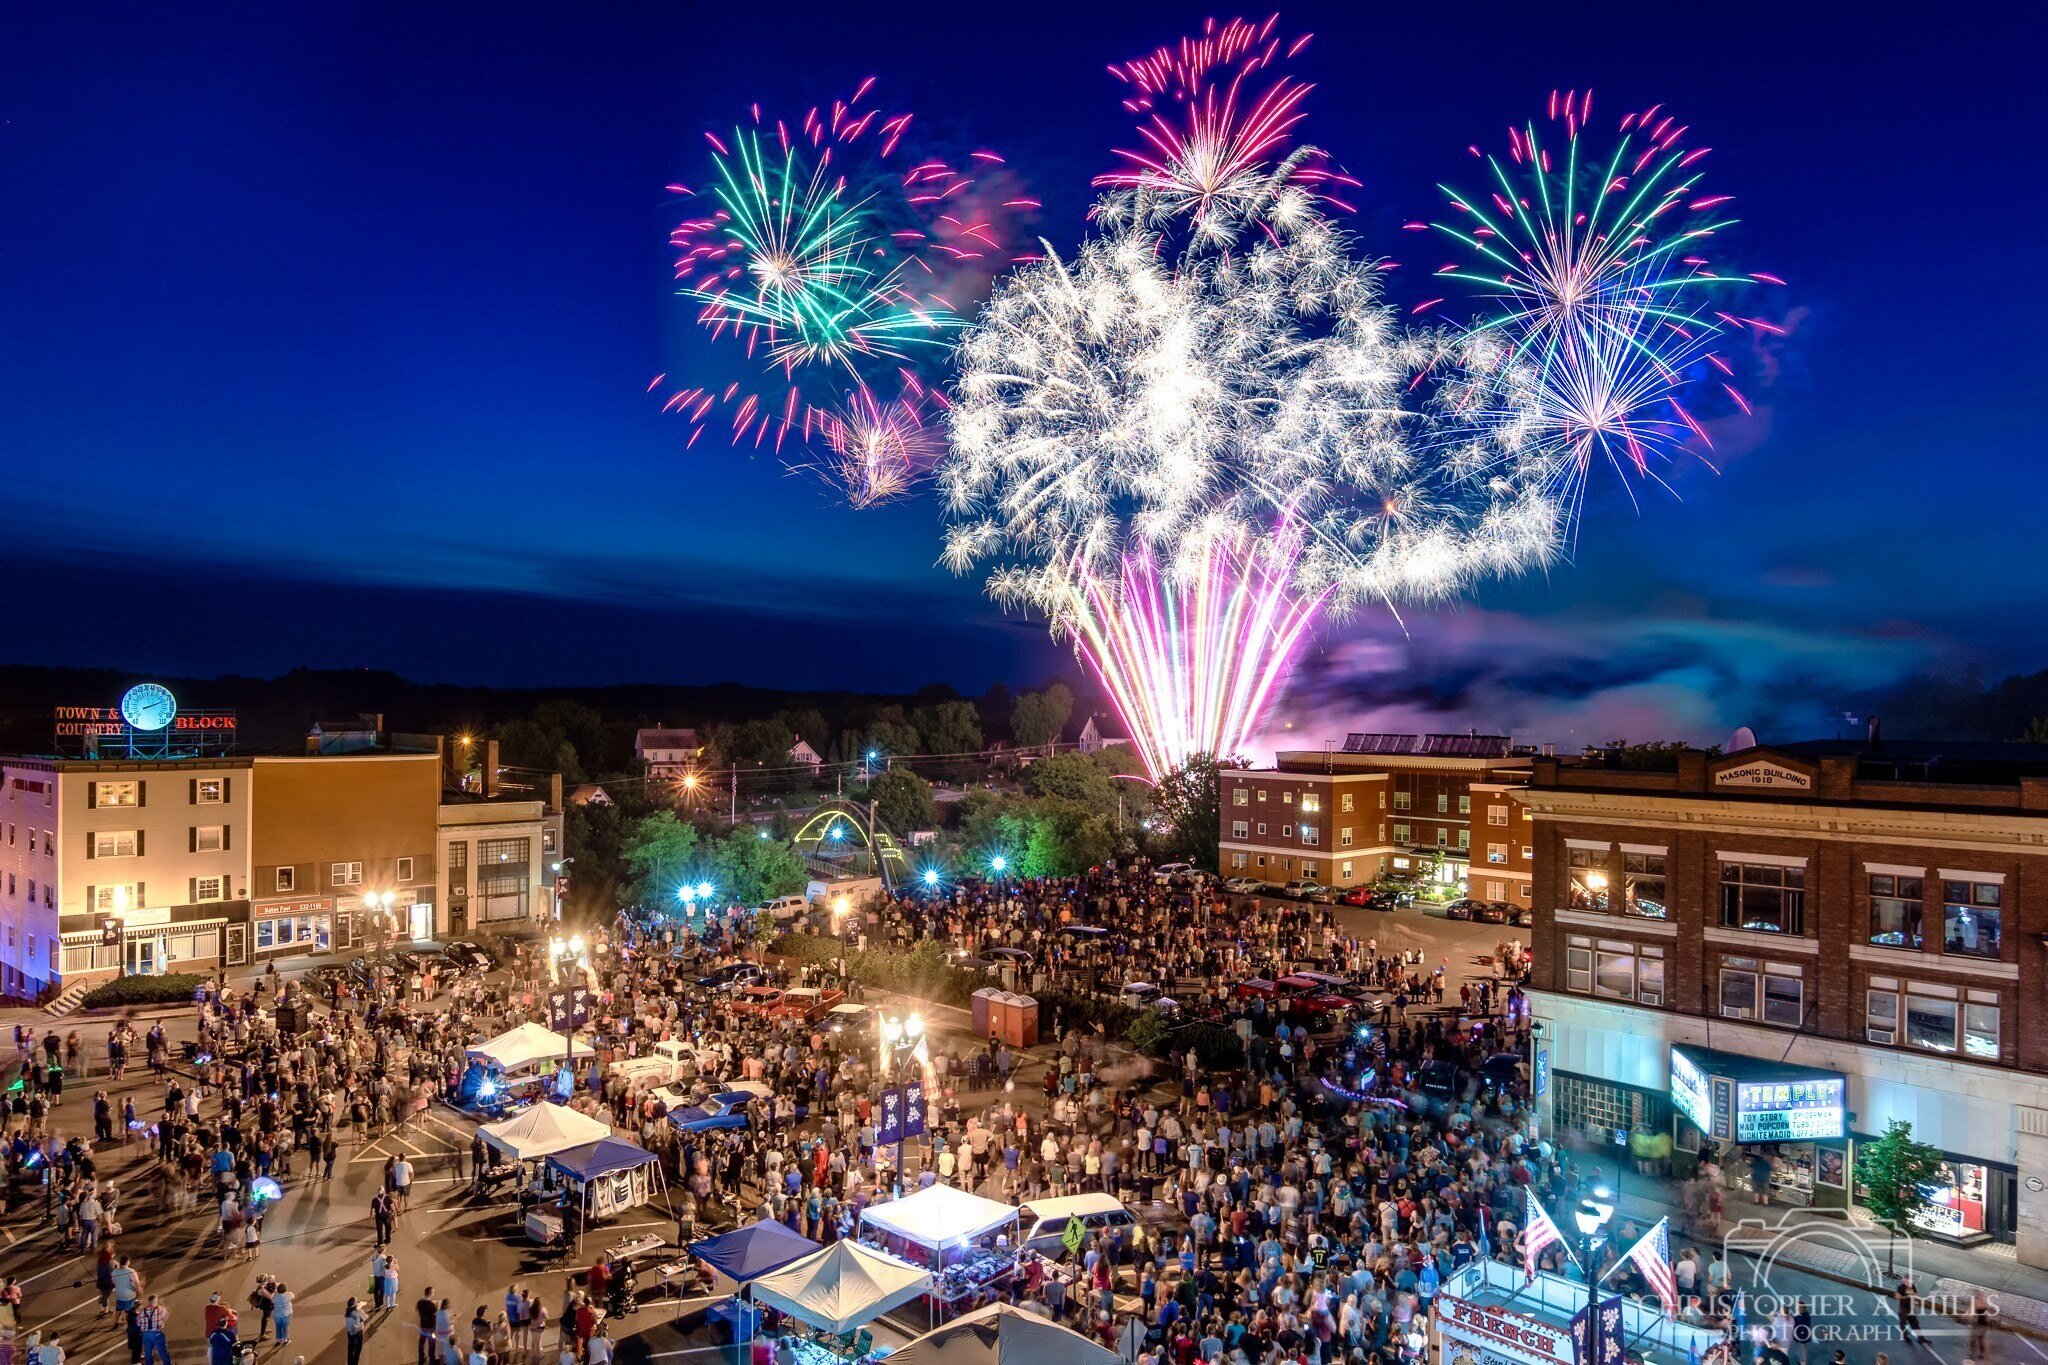  2019 Midnight Madness Fireworks in Market Square in Houlton, photo courtesy of Christopher A. Mills Photography.  